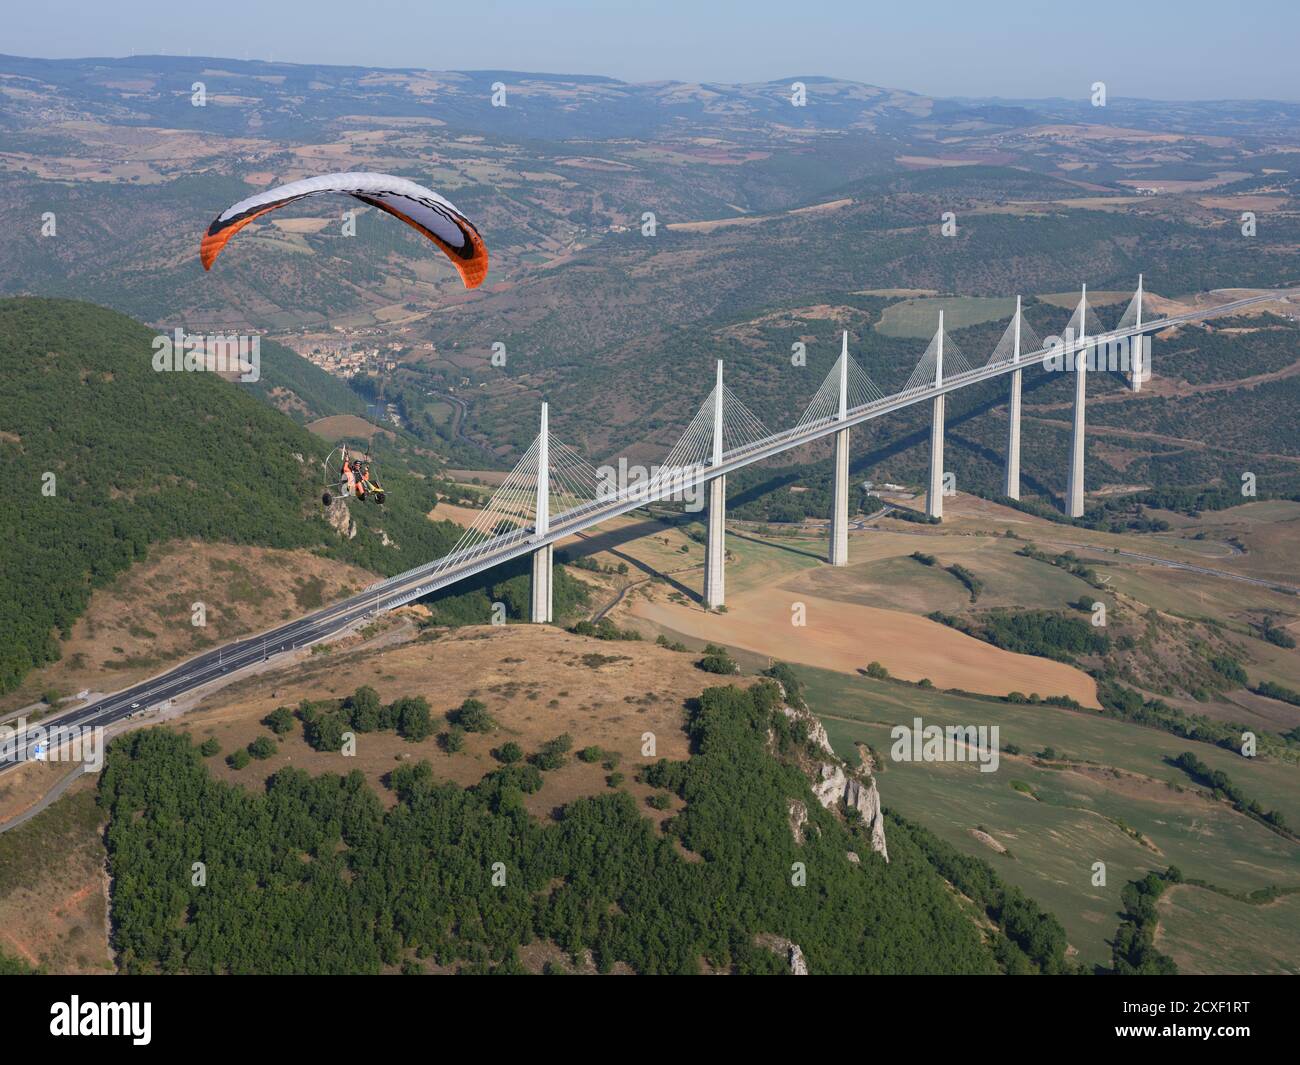 AIR-TO-AIR VIEW. Paramotor flying in the vicinity of the Millau Viaduct, the world's tallest bridge as of 2020. Millau, Tarn Valley, Aveyron, France. Stock Photo